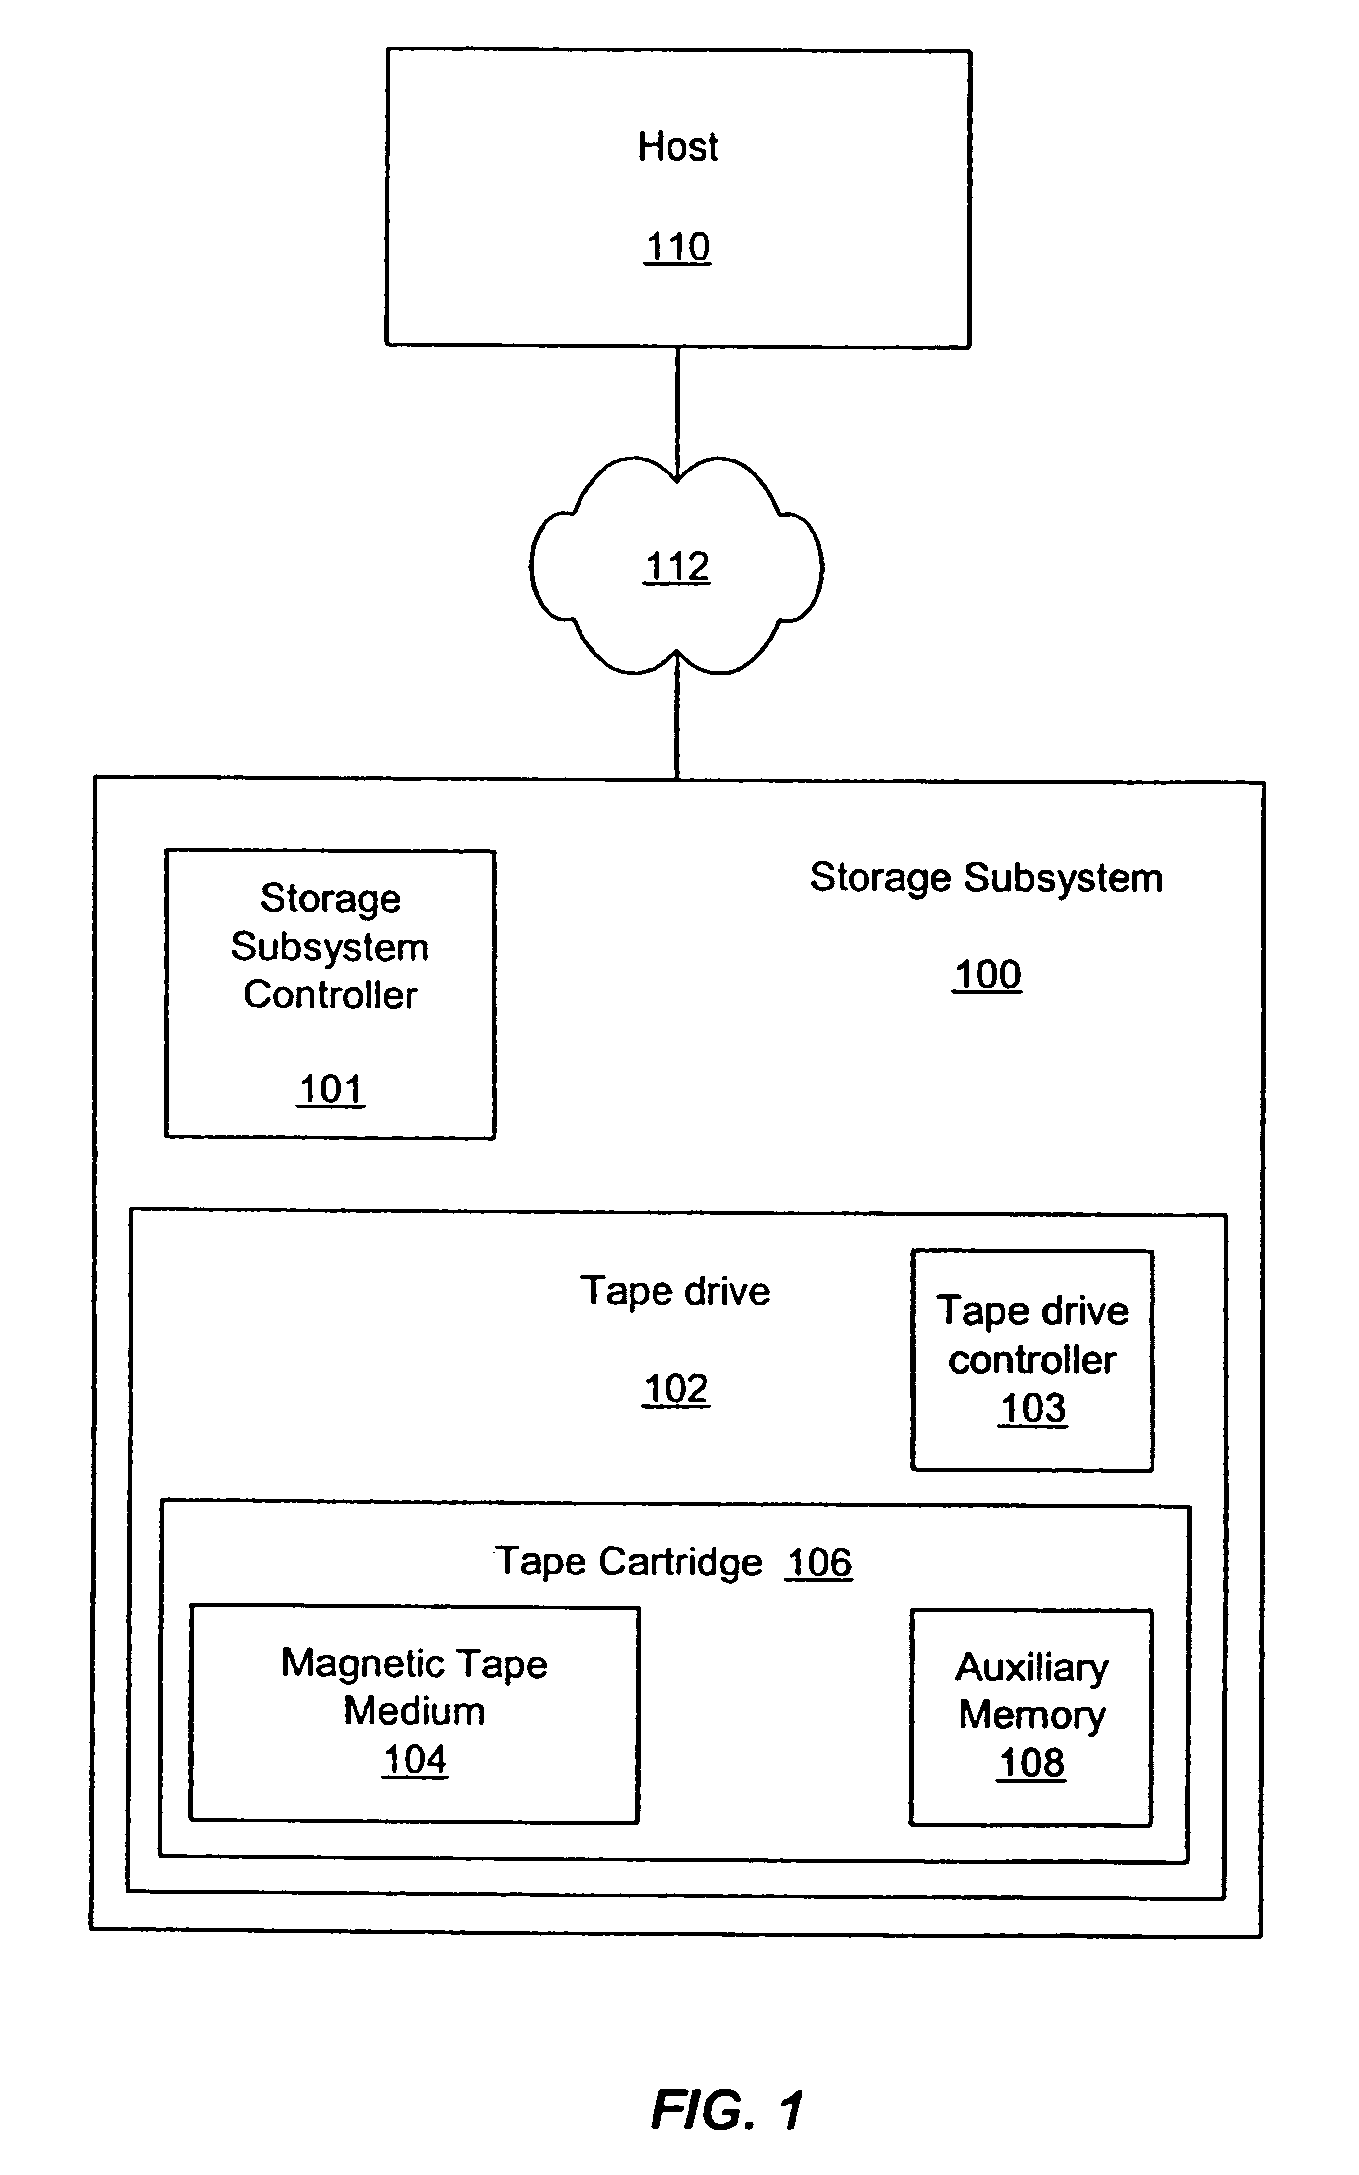 Emulation of auxiliary memory